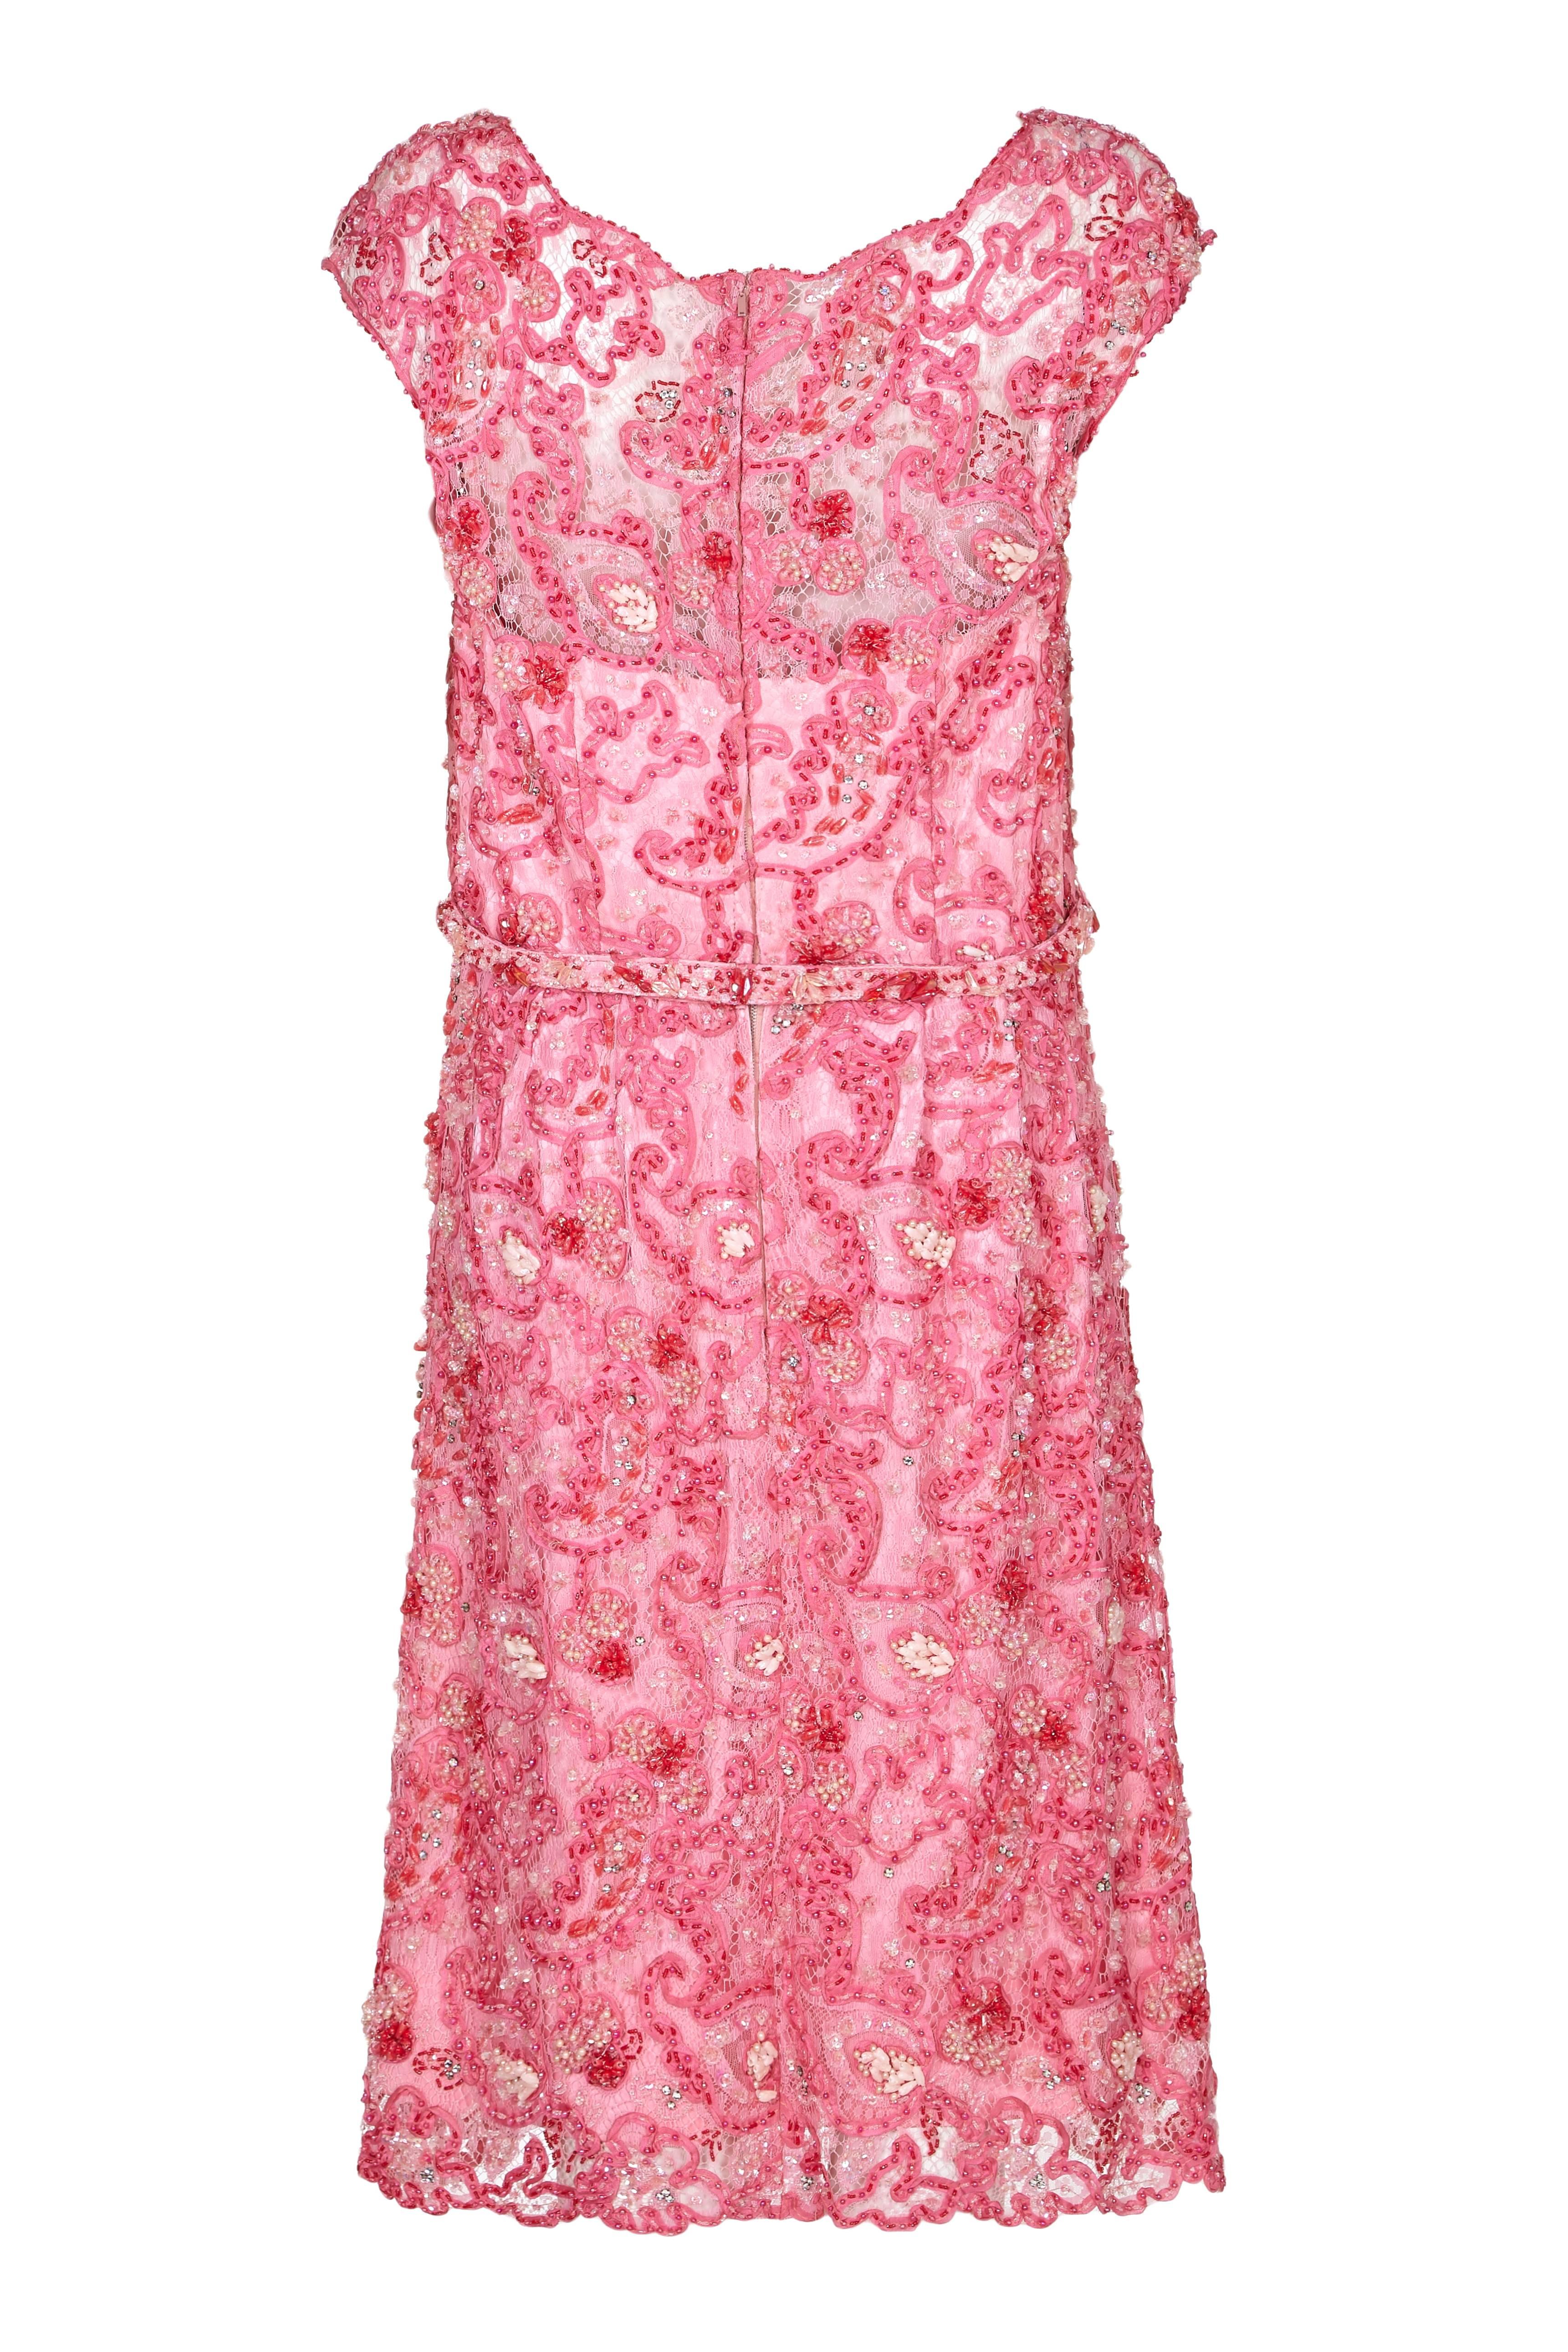 Fabulous vintage 1960s dress by London couturier Norman Hartnell, originally owned by Dame Barbara Cartland.  A really incredible couture dress with an over layer of pink lace which is lavishly and beautifully beaded in varying shades of pink. 